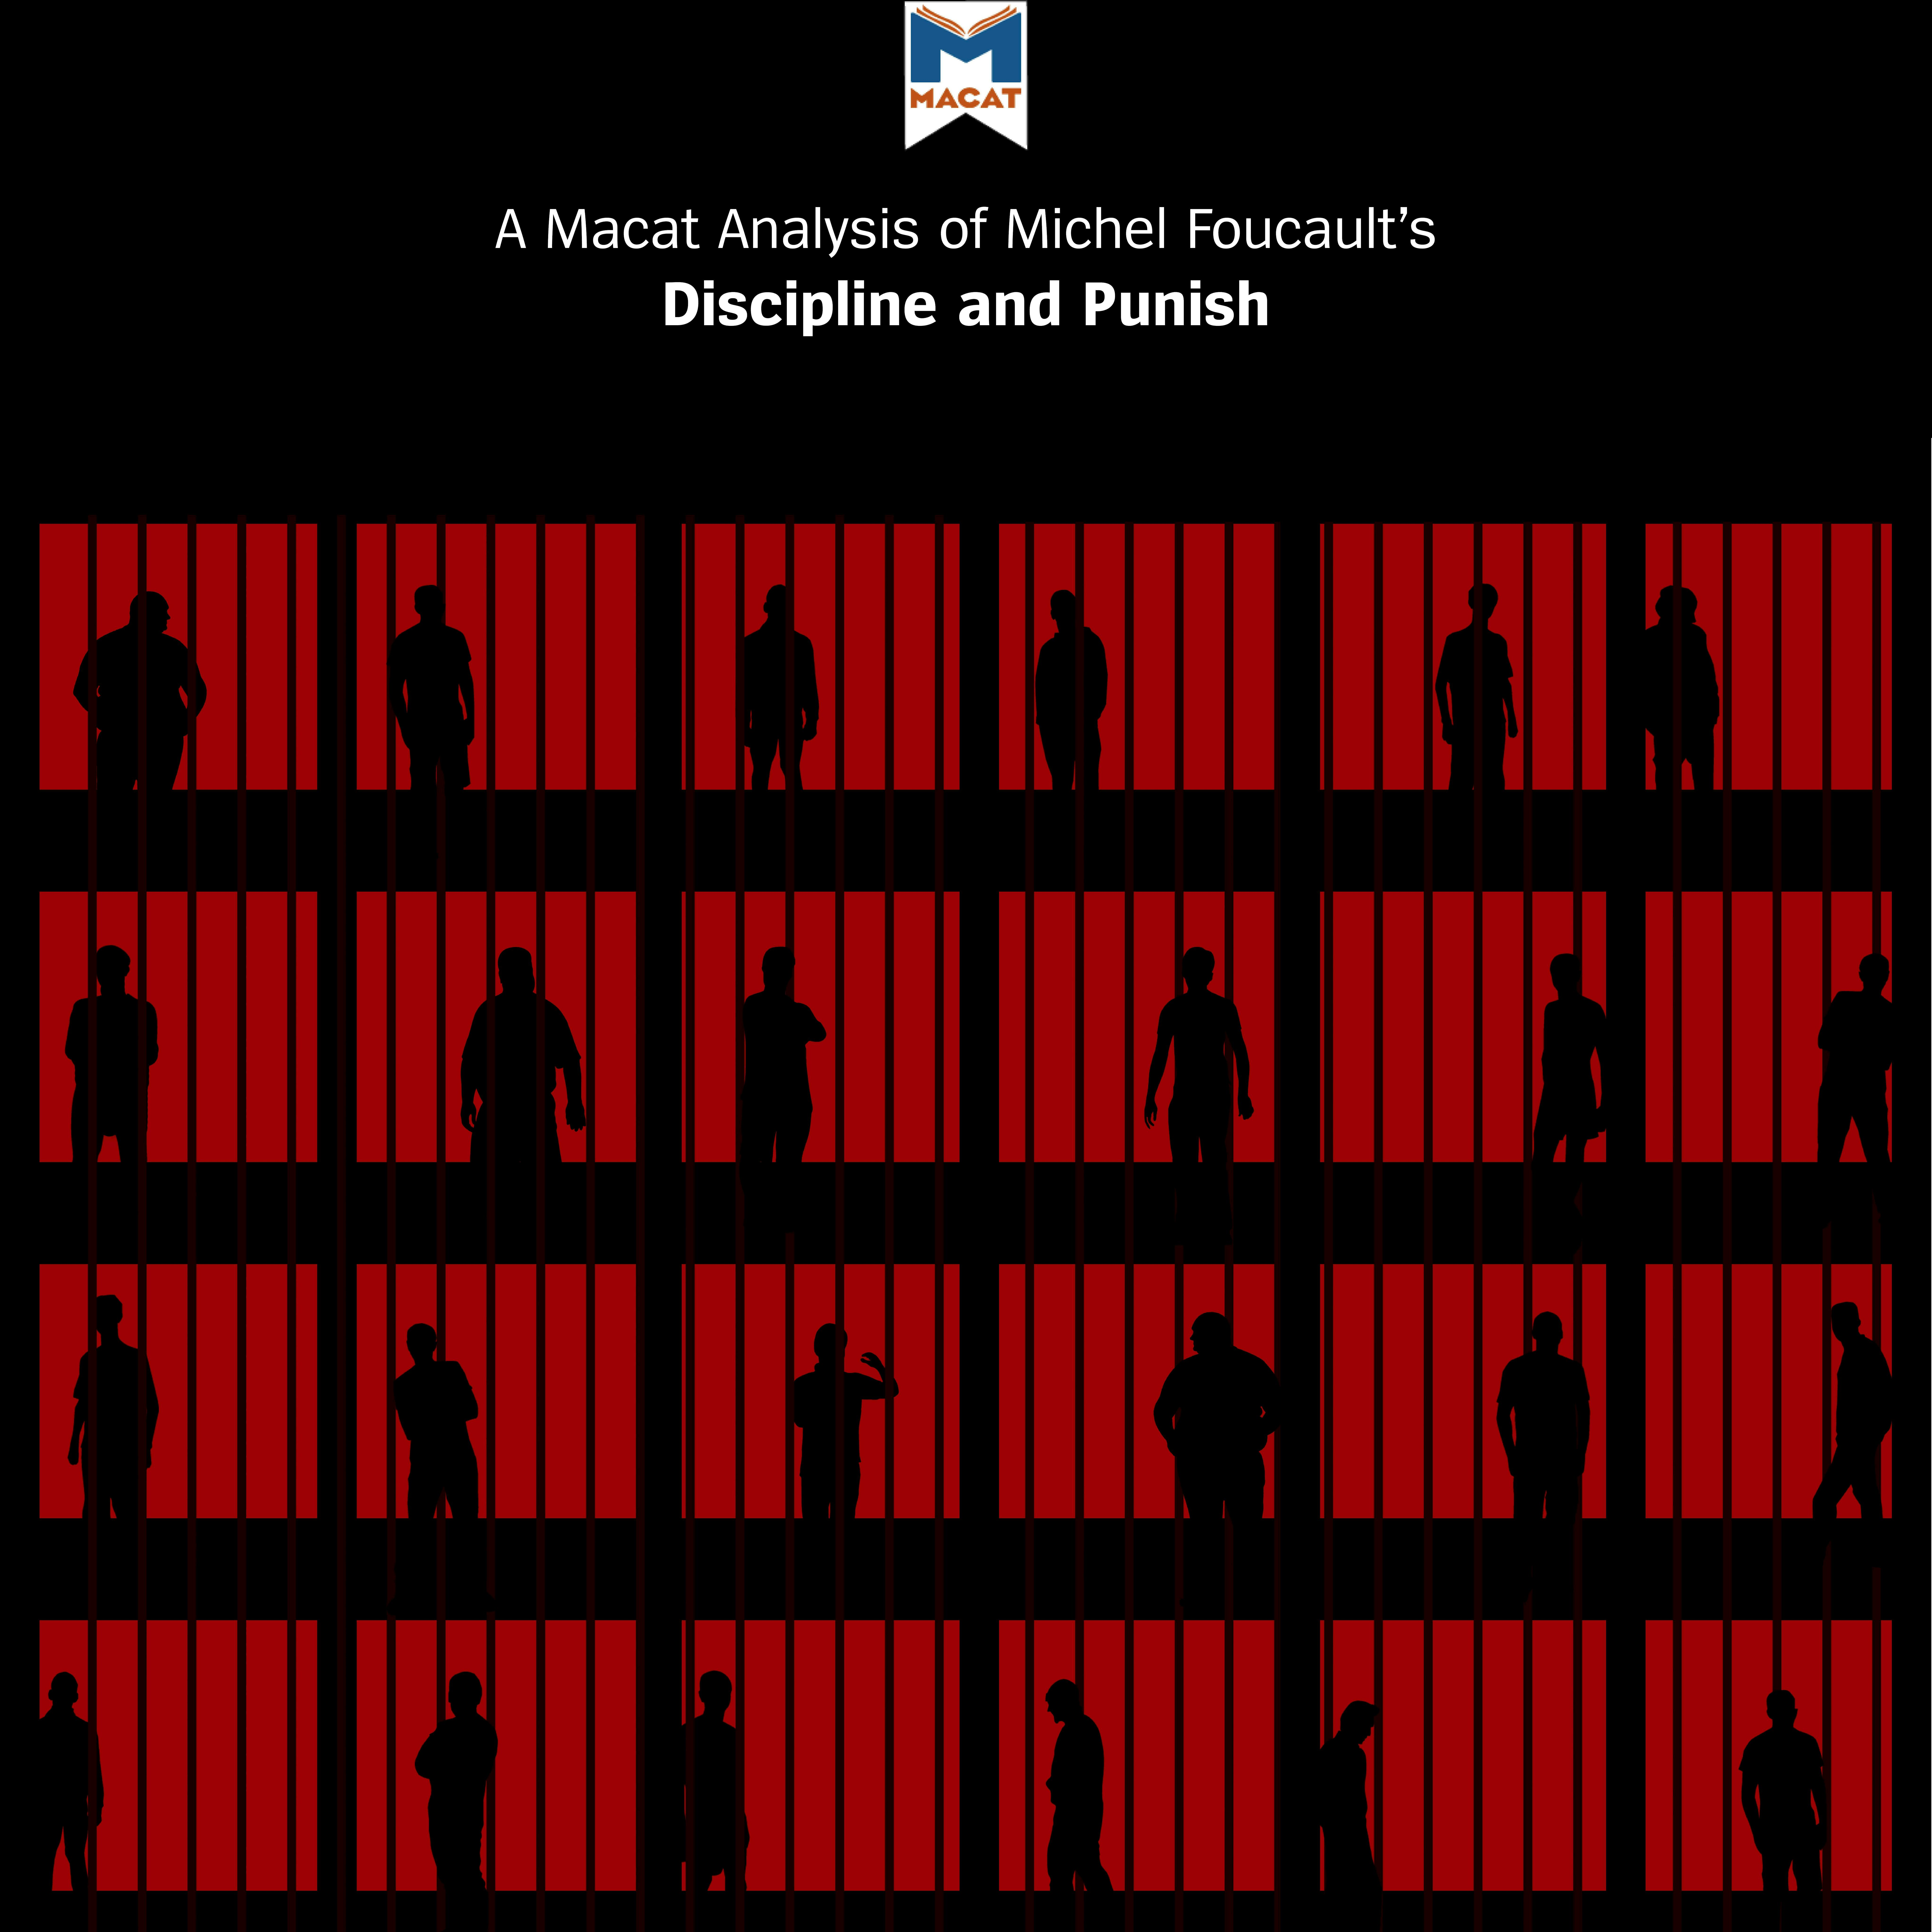 A Macat Analysis of Michel Foucault’s Discipline and Punish - undefined